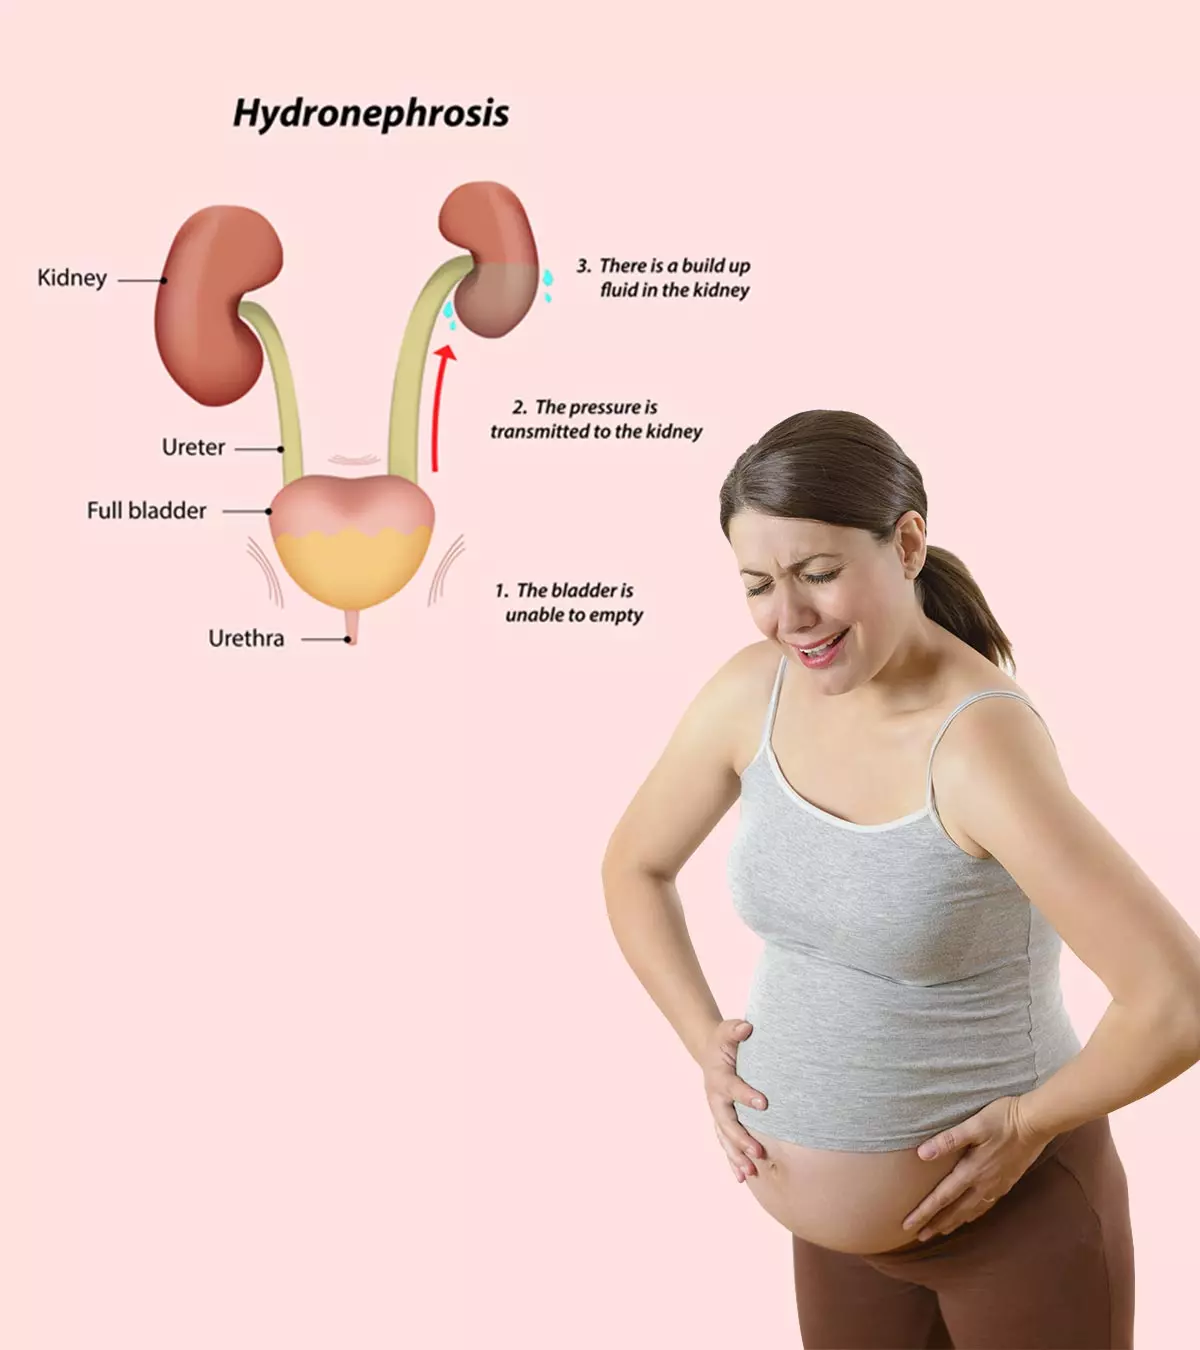 Hydronephrosis During Pregnancy - Causes, Symptoms & Treatments